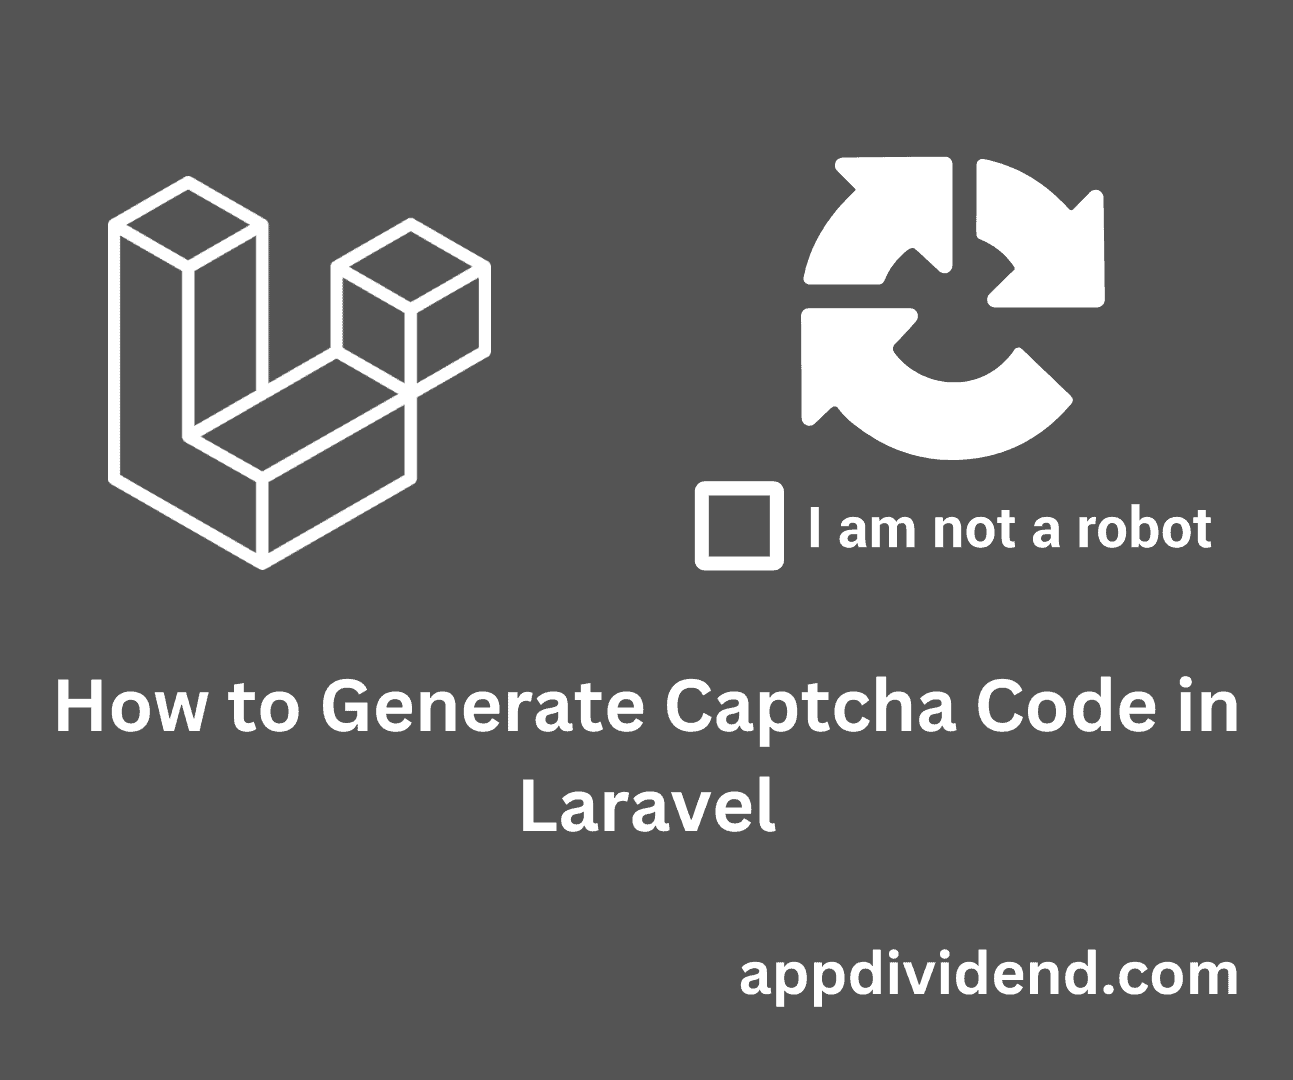 How to Generate Captcha Code in Laravel